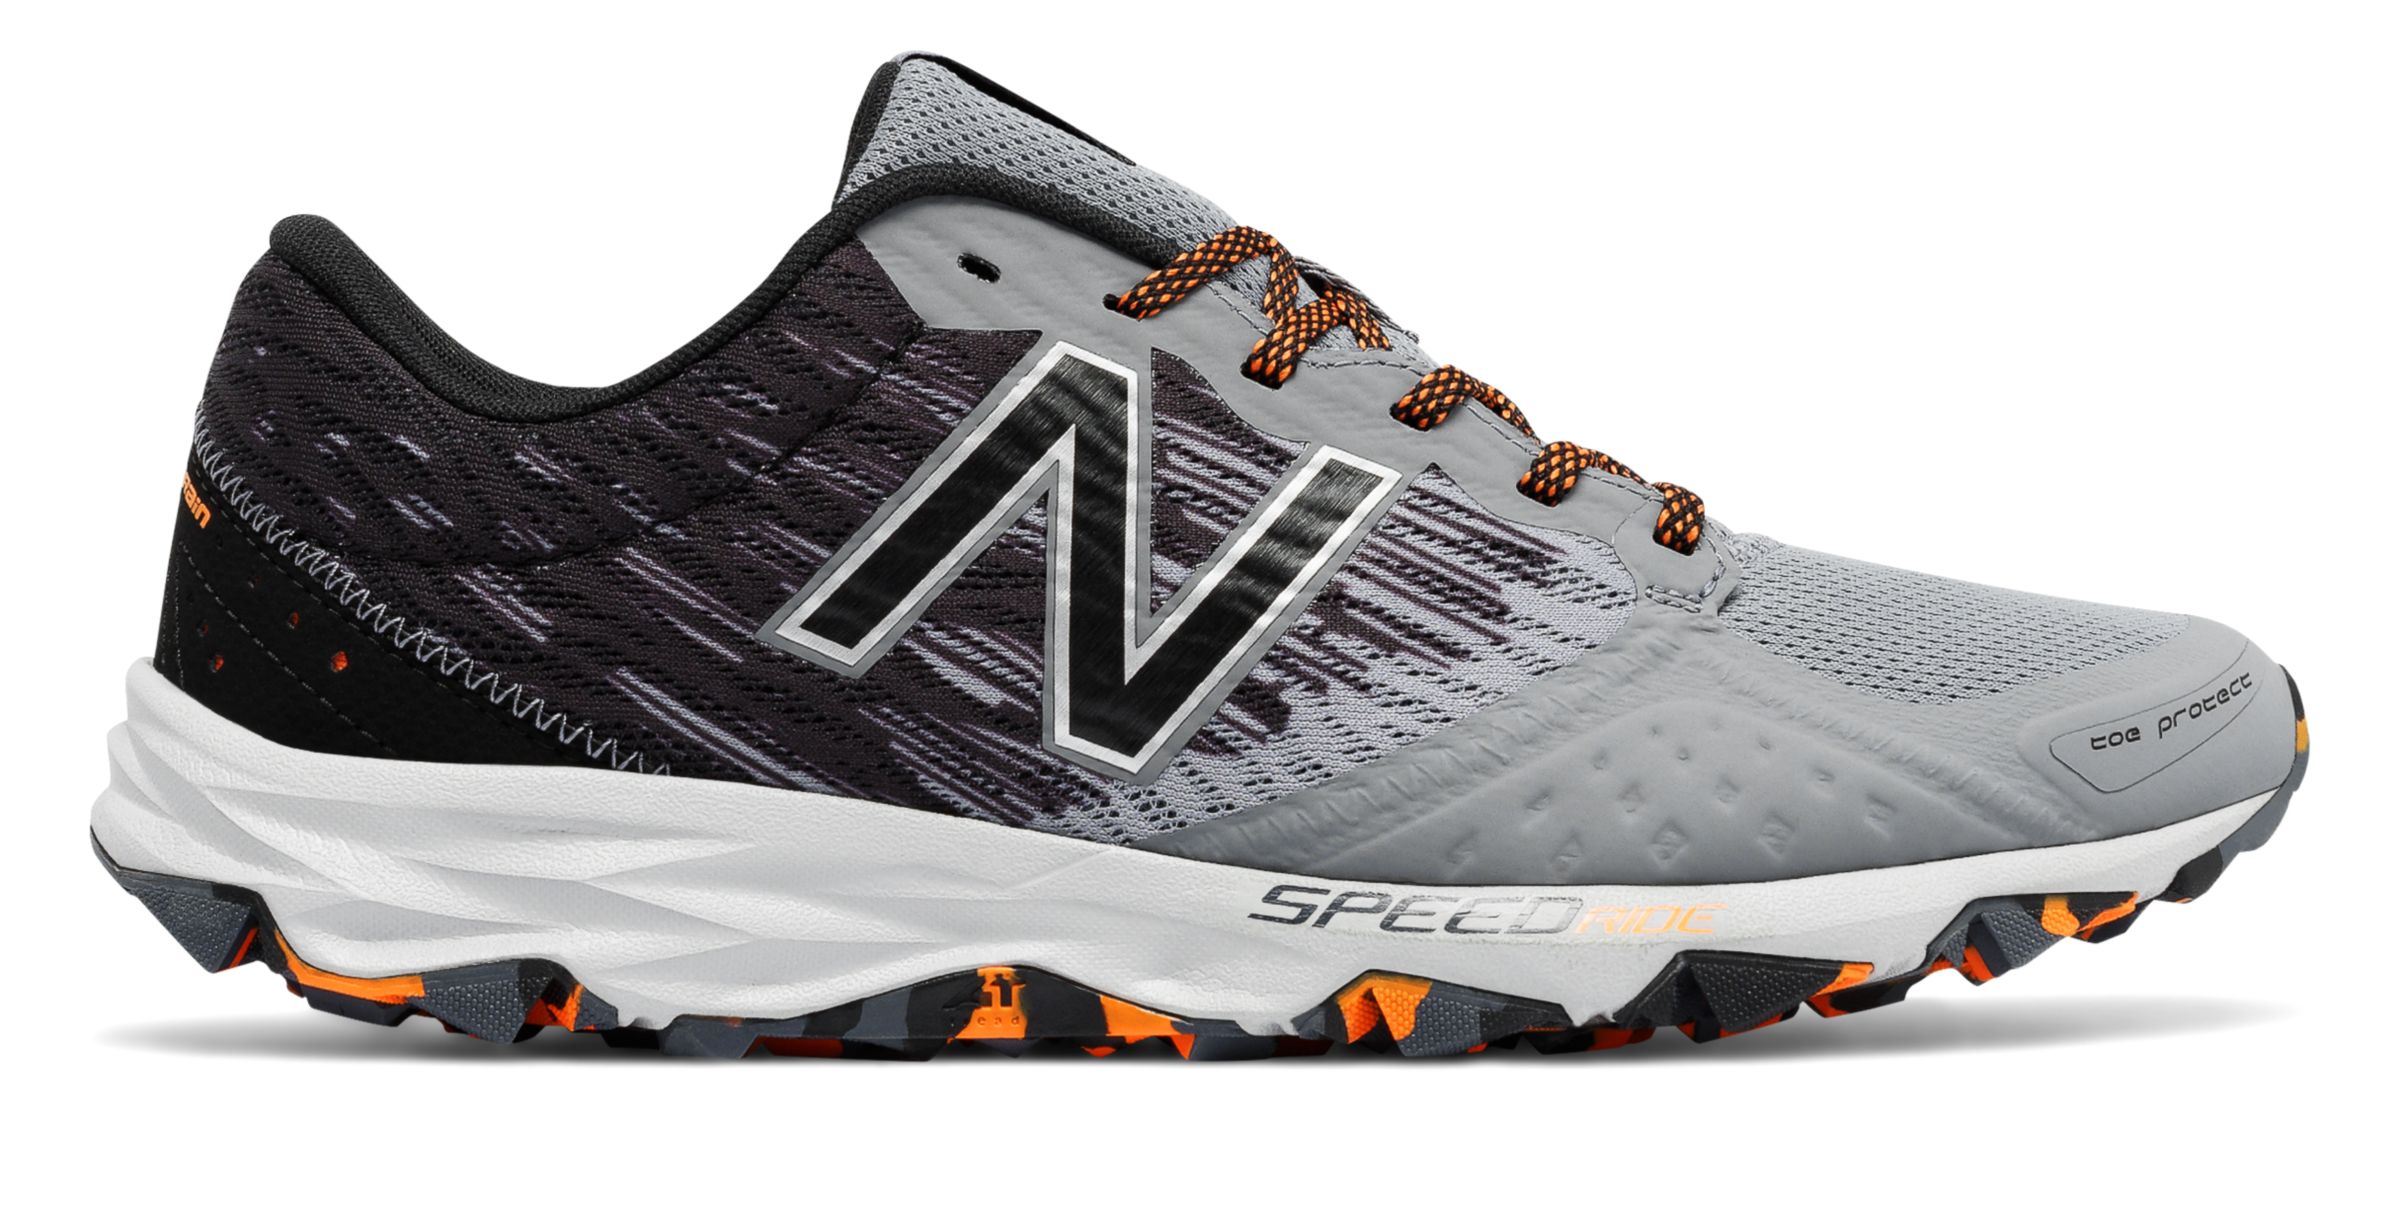 New Balance MT690-V2 on Sale - Discounts Up to 20% Off on MT690LG2 at Joe's New  Balance Outlet